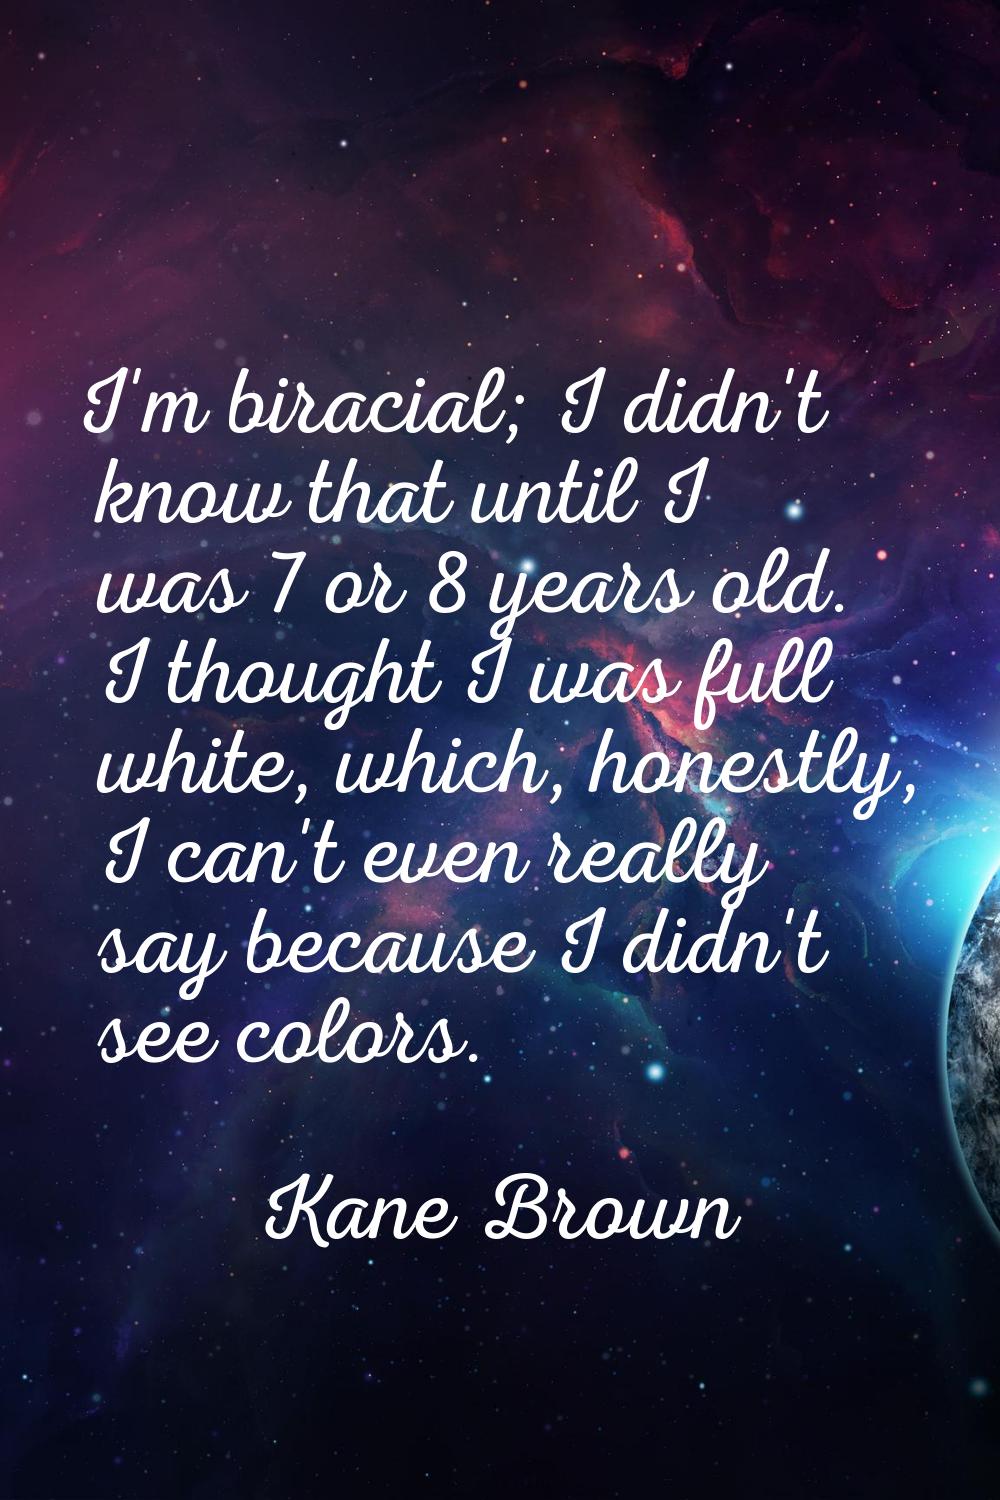 I'm biracial; I didn't know that until I was 7 or 8 years old. I thought I was full white, which, h